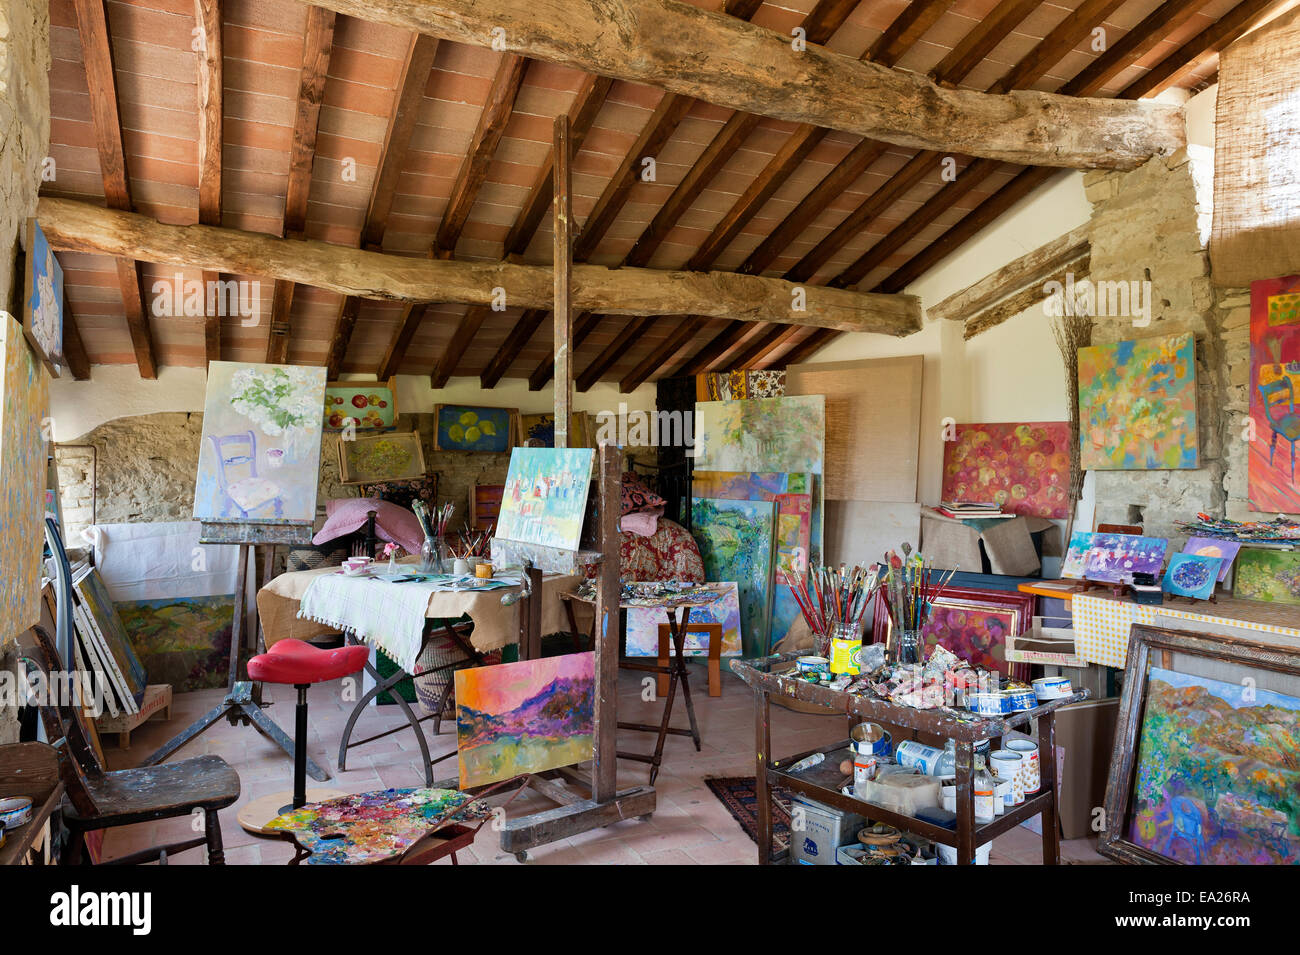 Rustic painters studio with brightly coloured artworks, paints and beamed ceiling Stock Photo